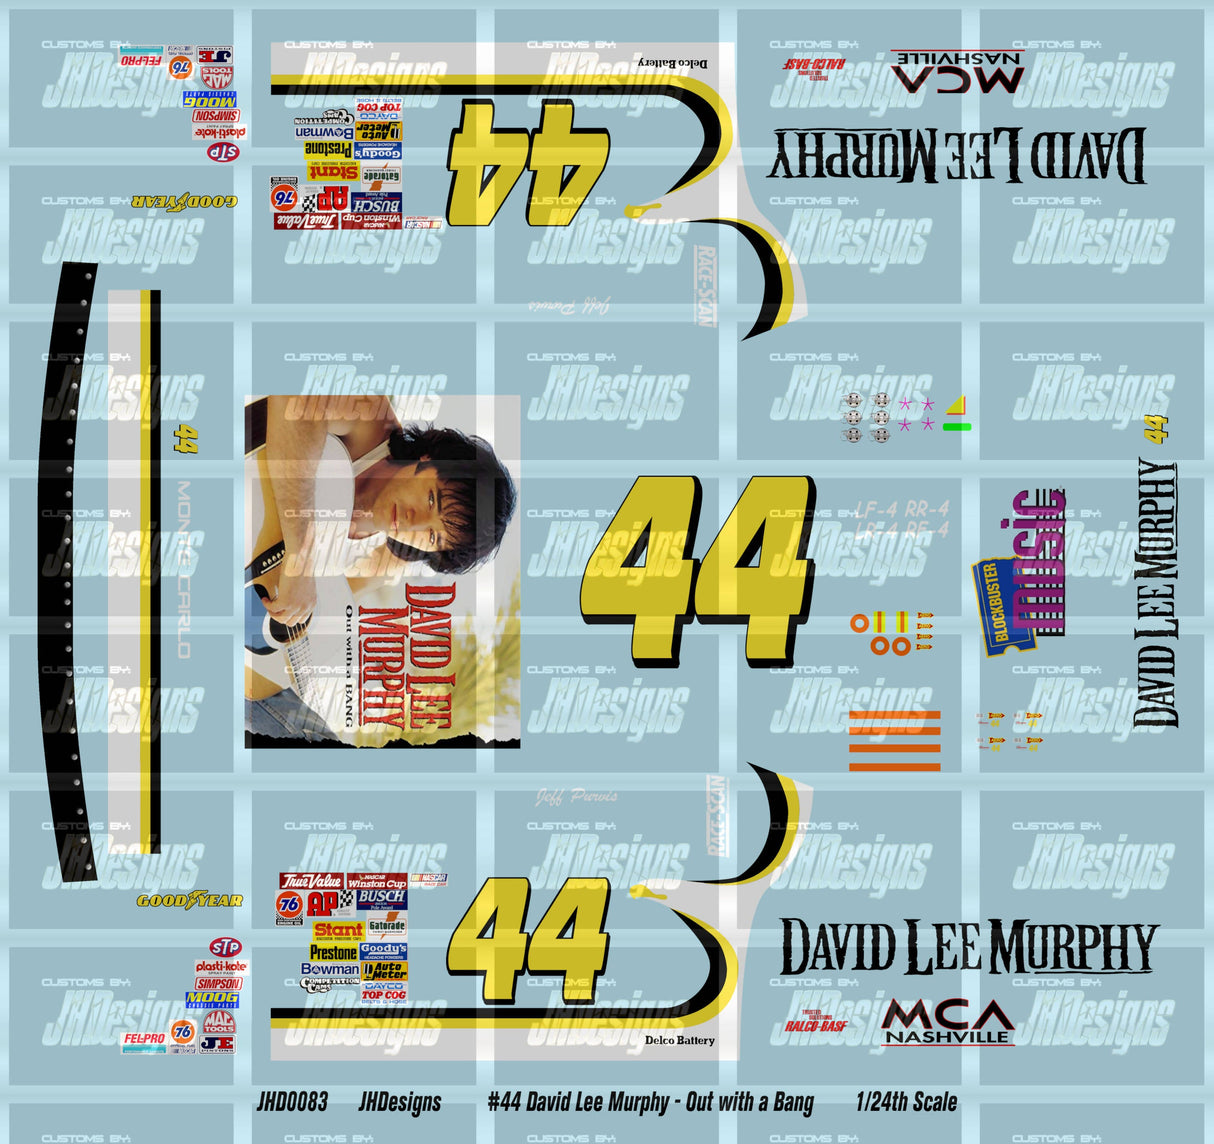 JH Designs Jeff Purvis 1996 CUP #44 David Lee Murphy - Out With A Bang 1:24 Racecar Decal Set